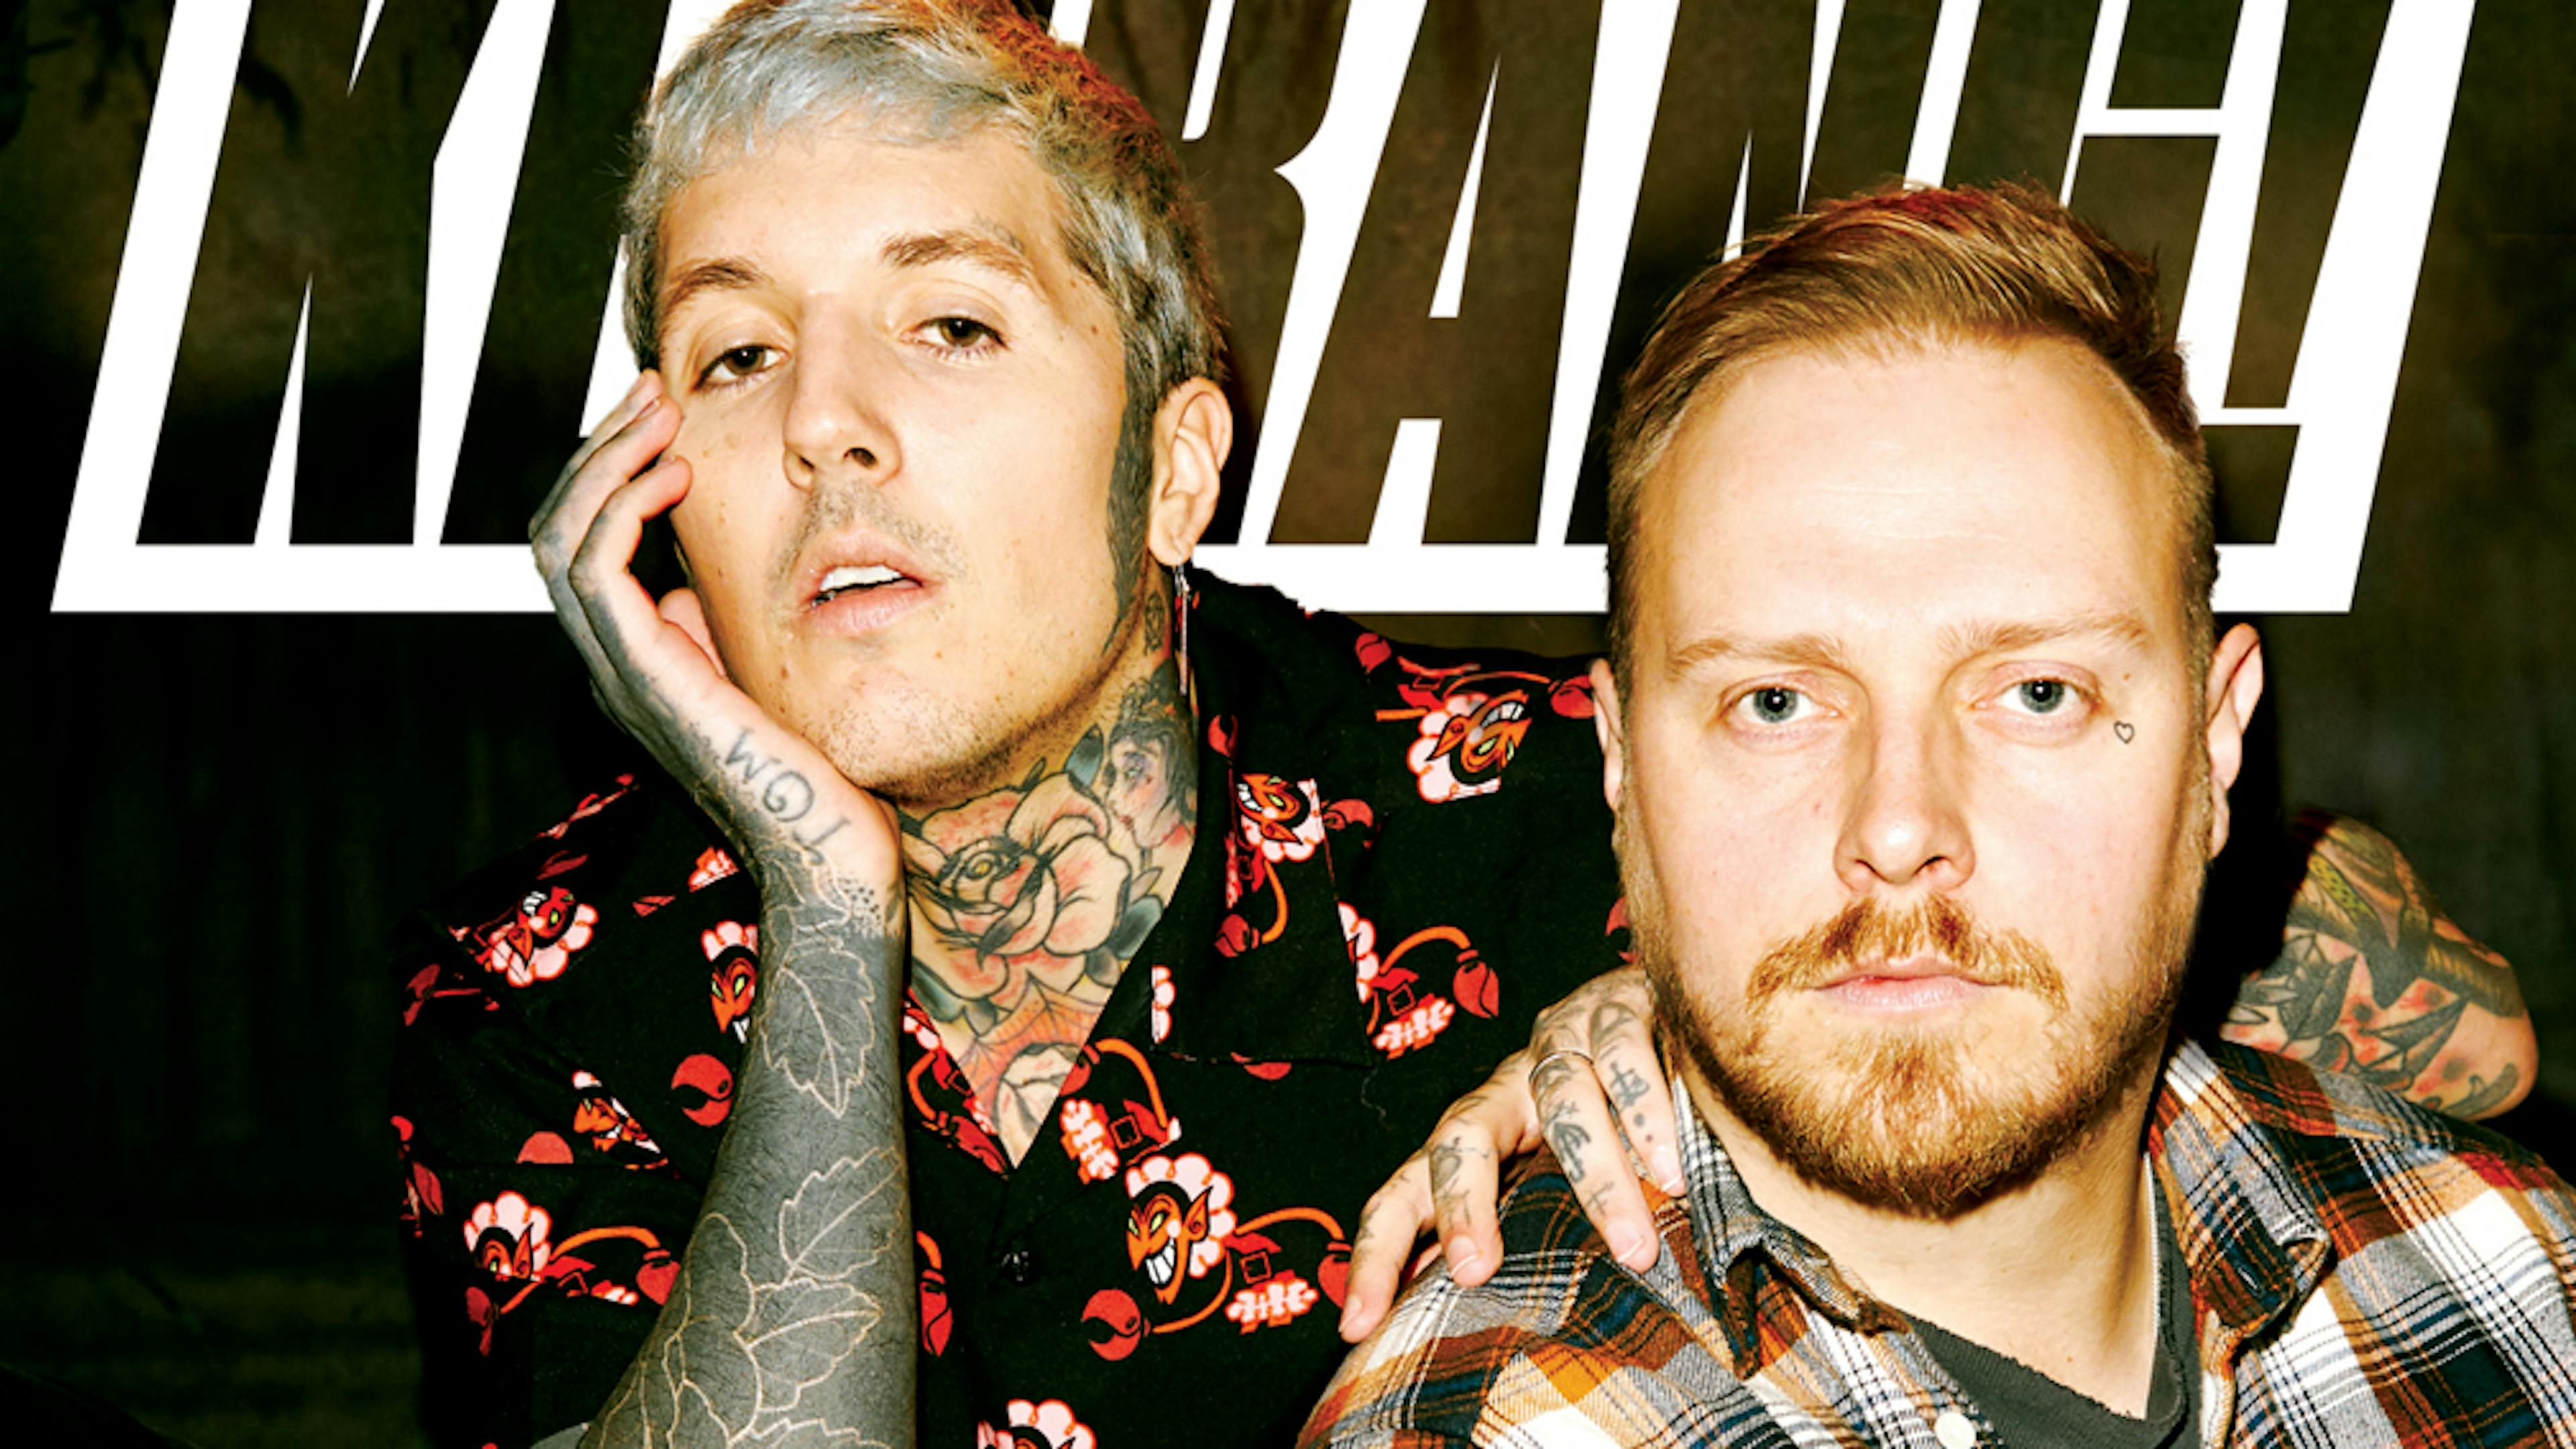 Bring Me The Horizon And Architects: "Music Is Our Last Hope Of Uniting People"